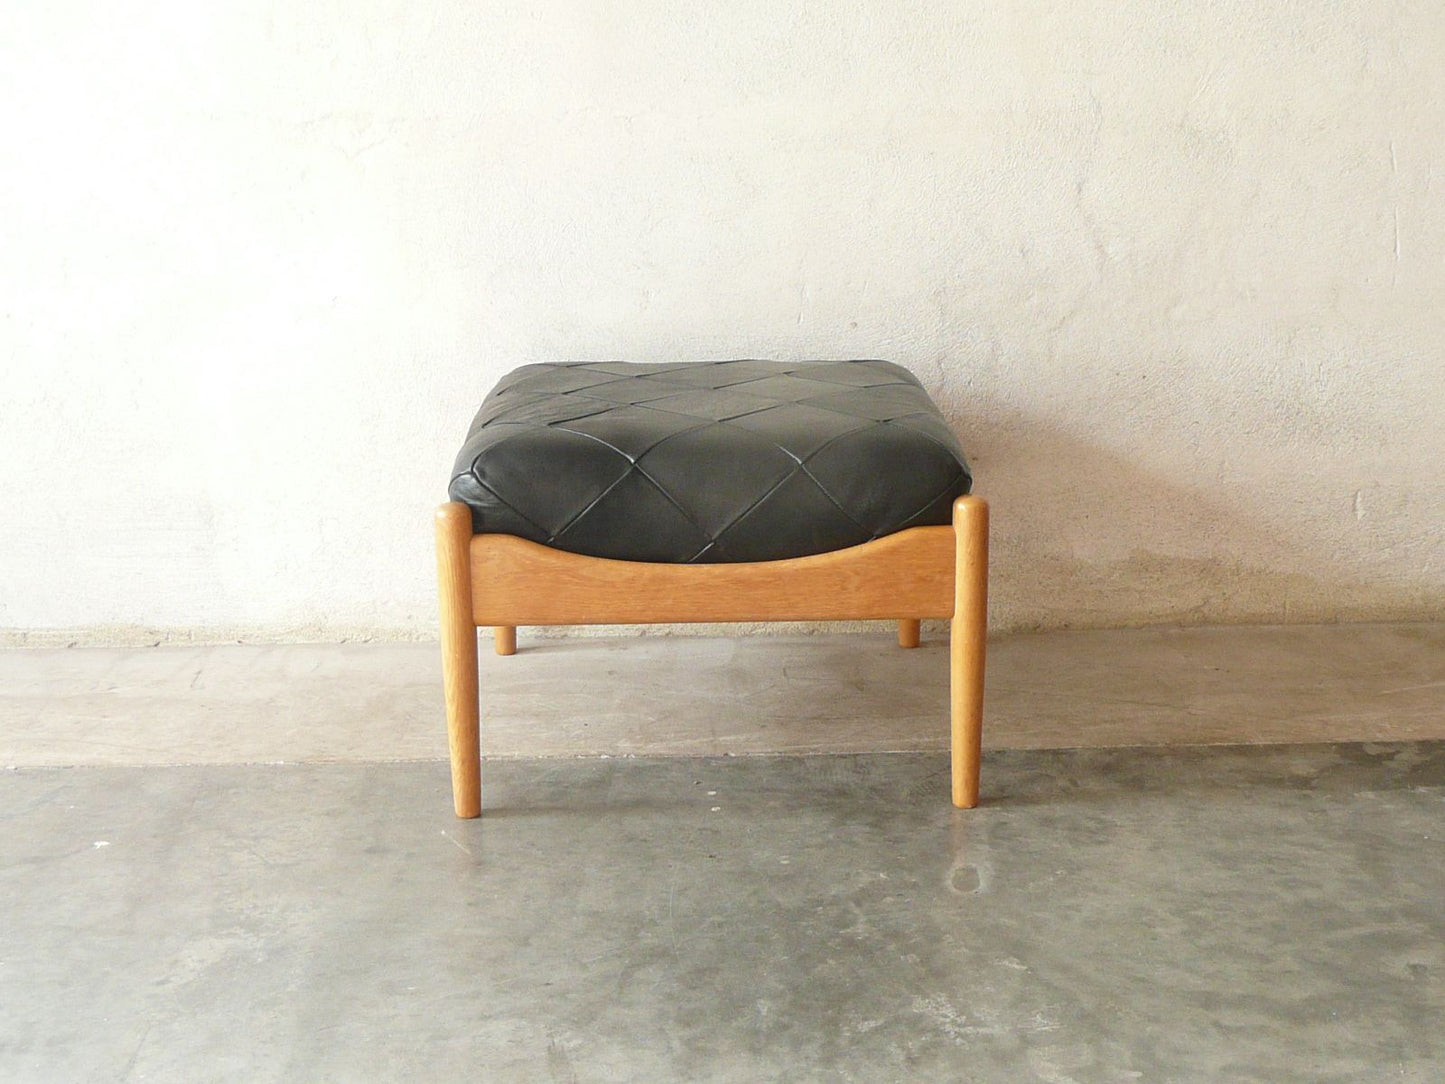 New price: Oak and leather footstool